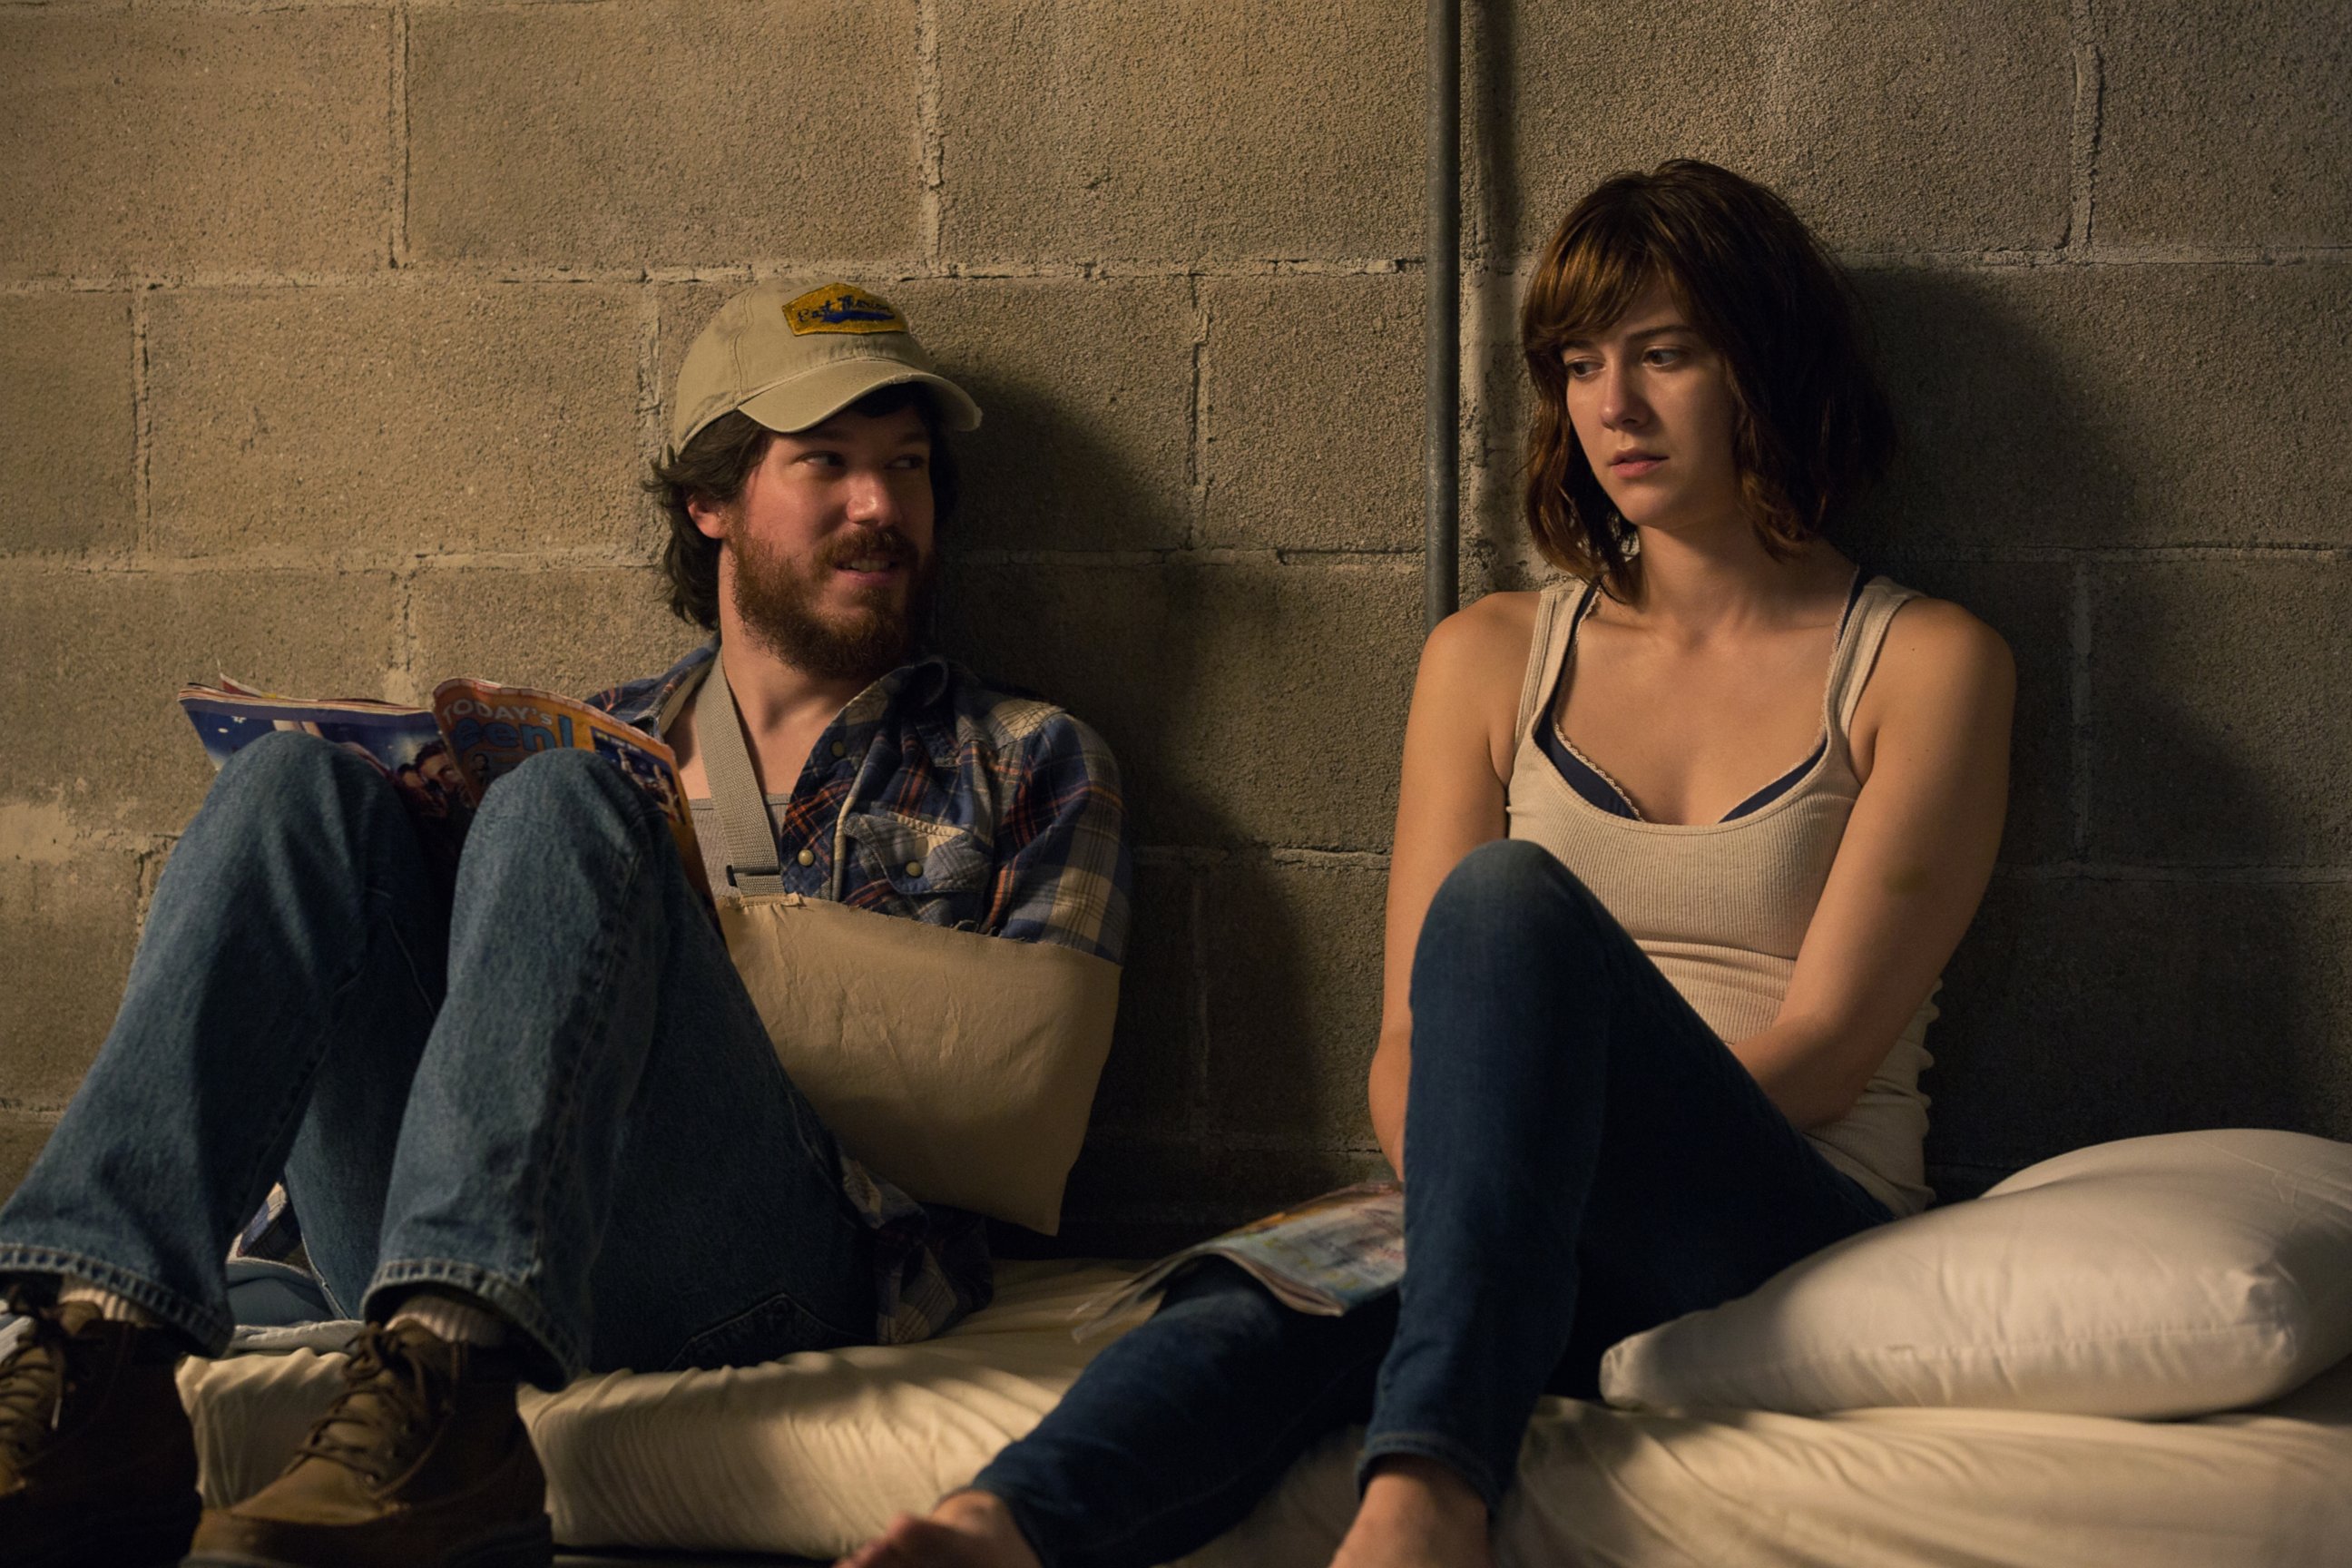 PHOTO: This image released by Paramount Pictures shows John Gallagher Jr., left, and Mary Elizabeth Winstead in a scene from "10 Cloverfield Lane."